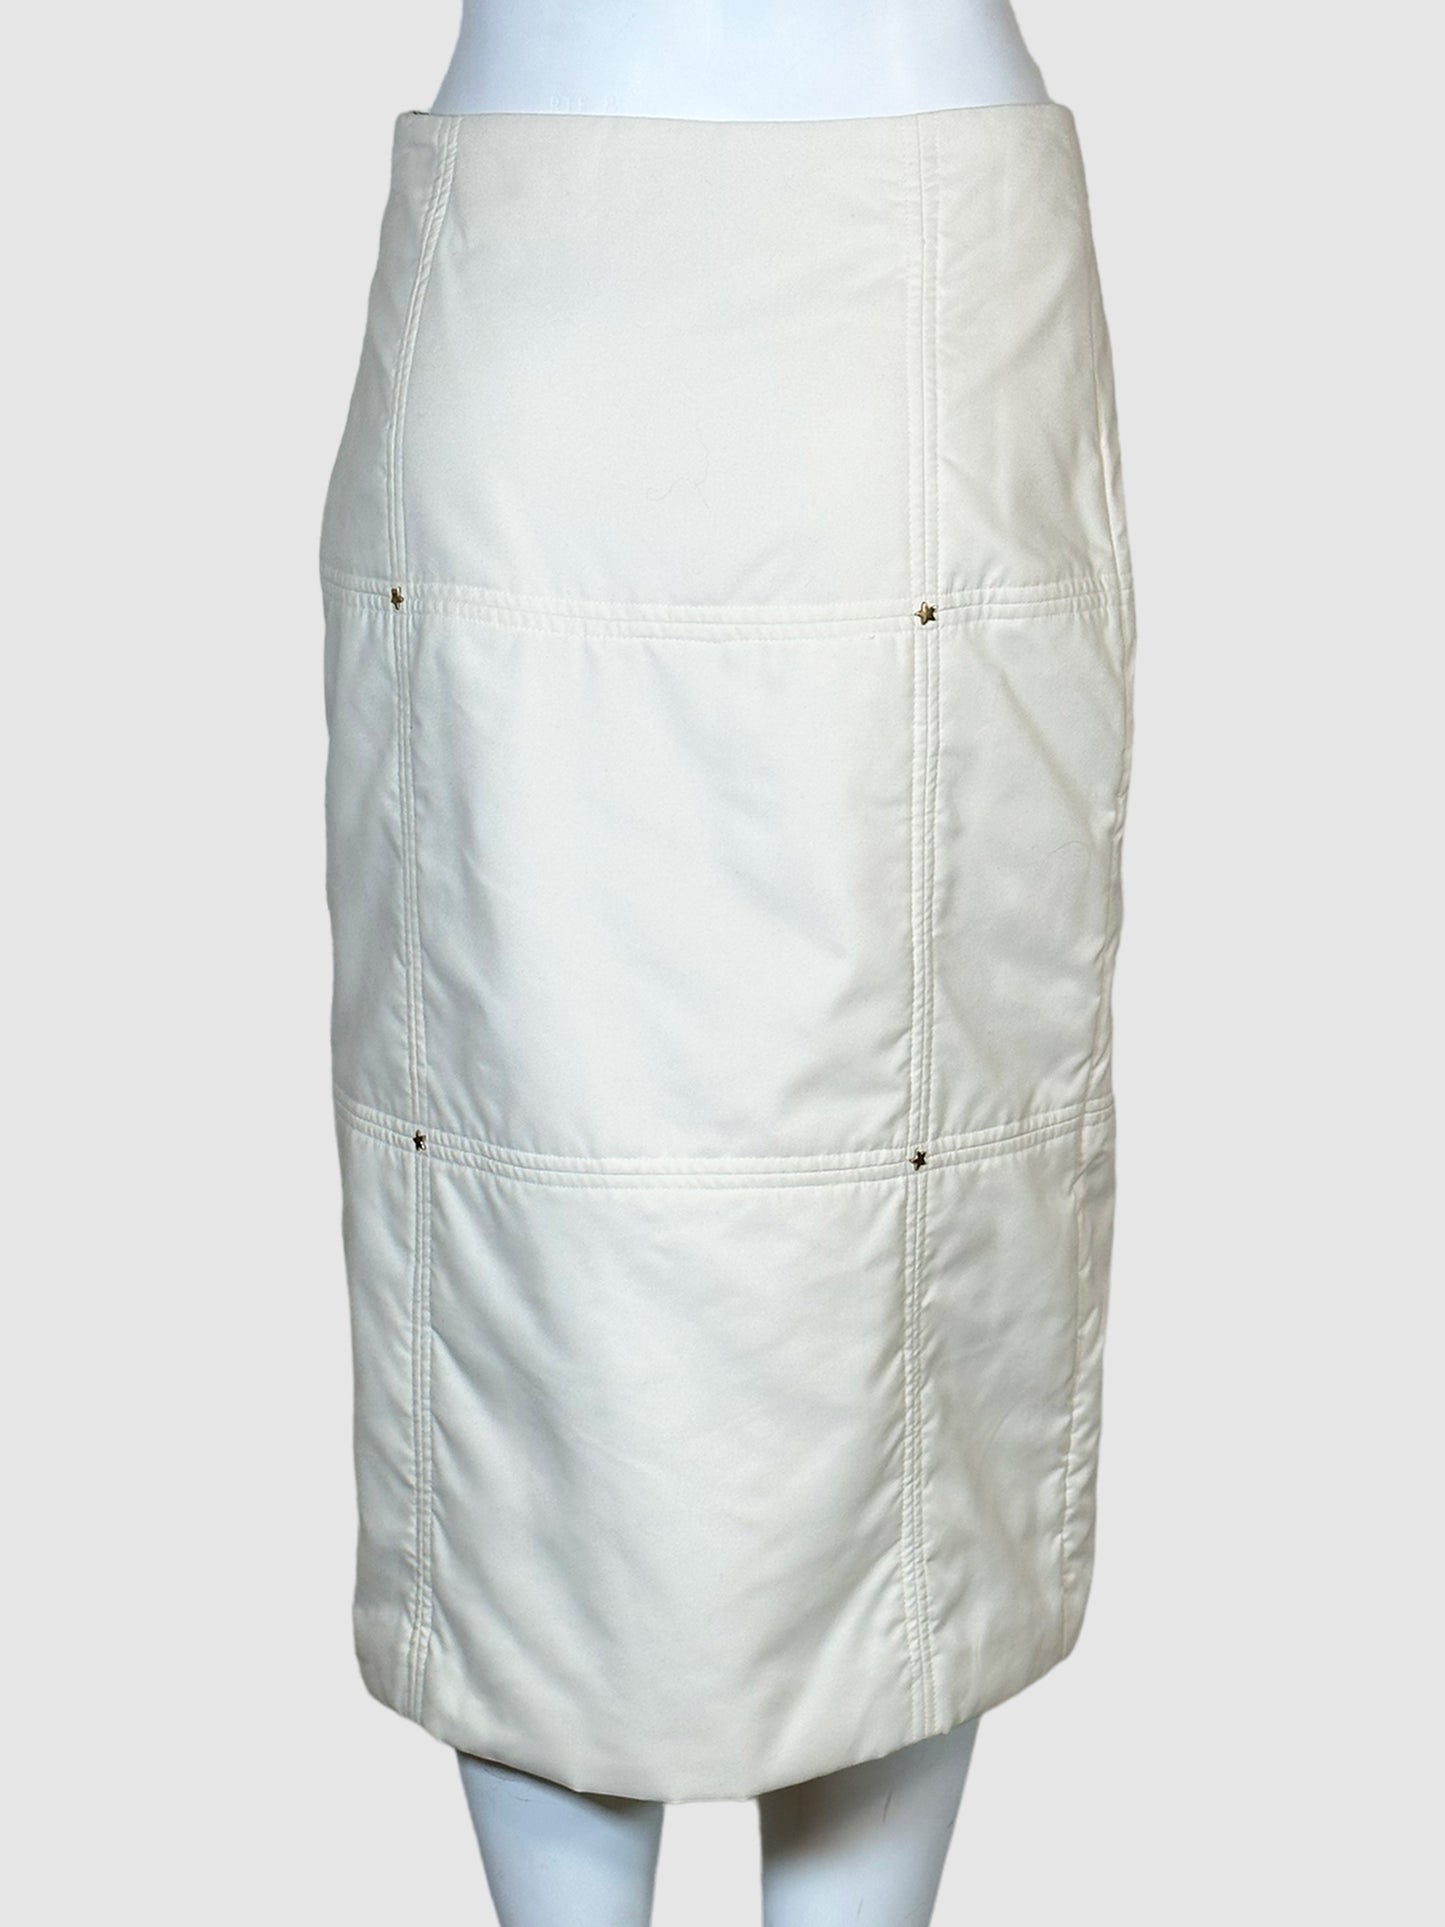 Mondi Off-White Quilted Skirt - Size 36